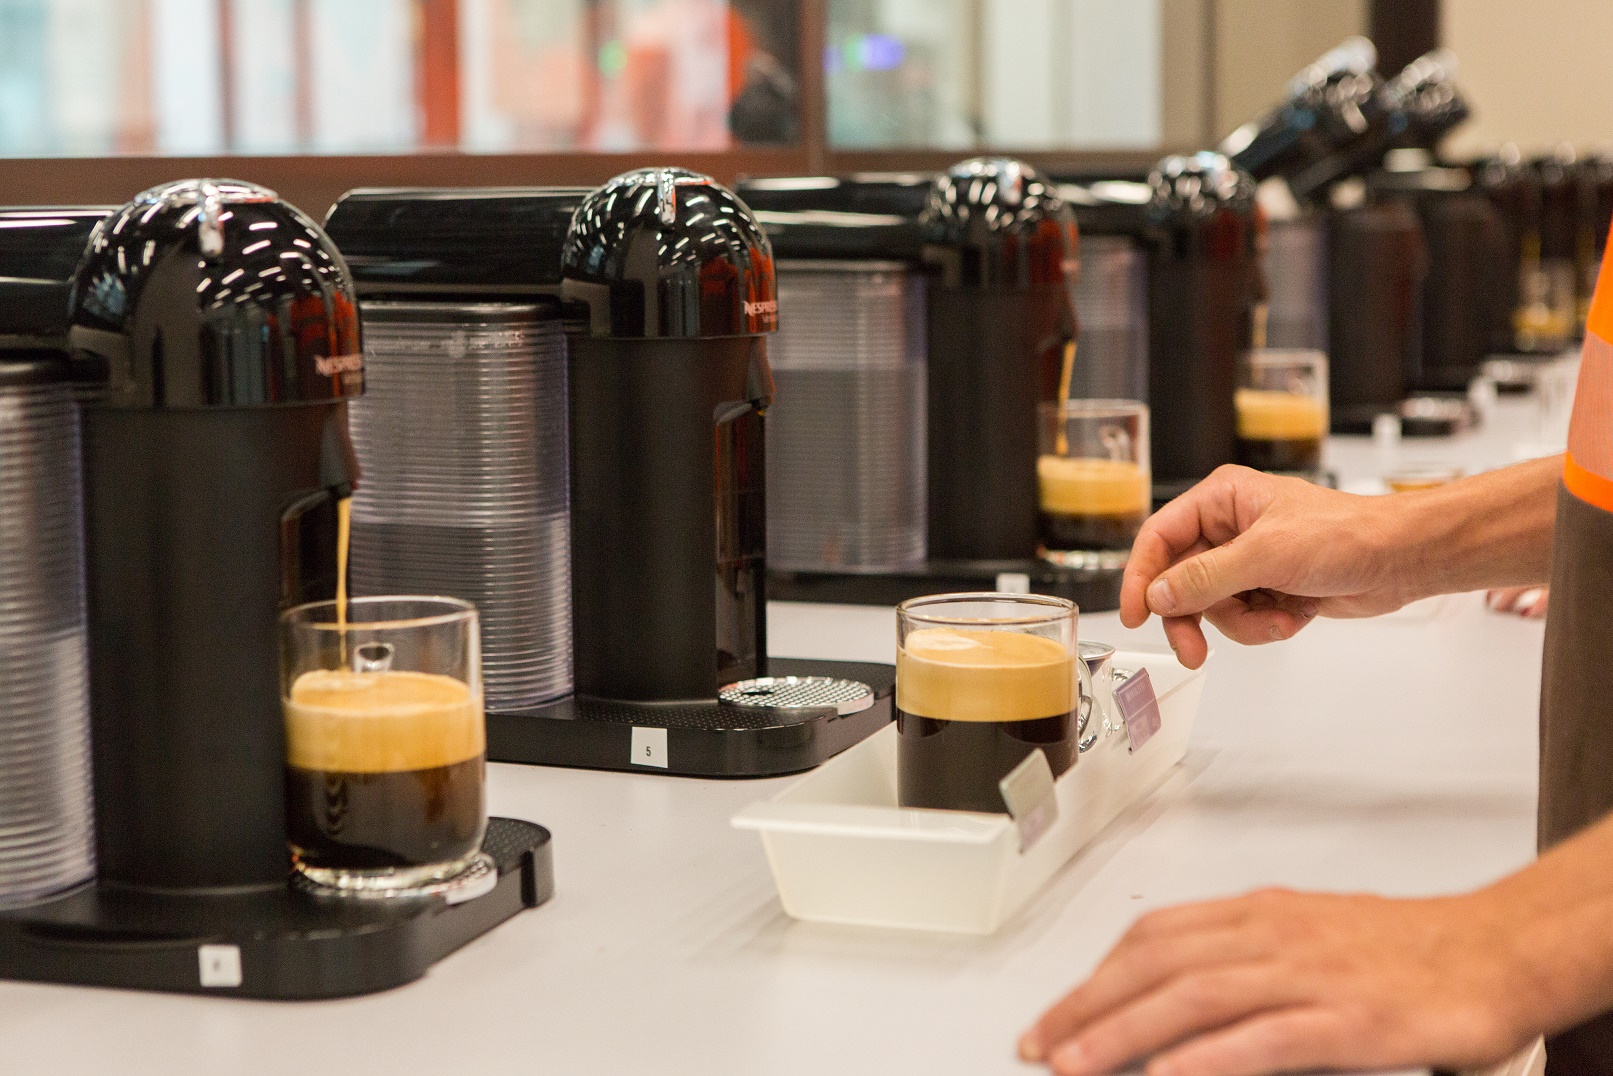 At the heart of Nespresso Vertuo system 